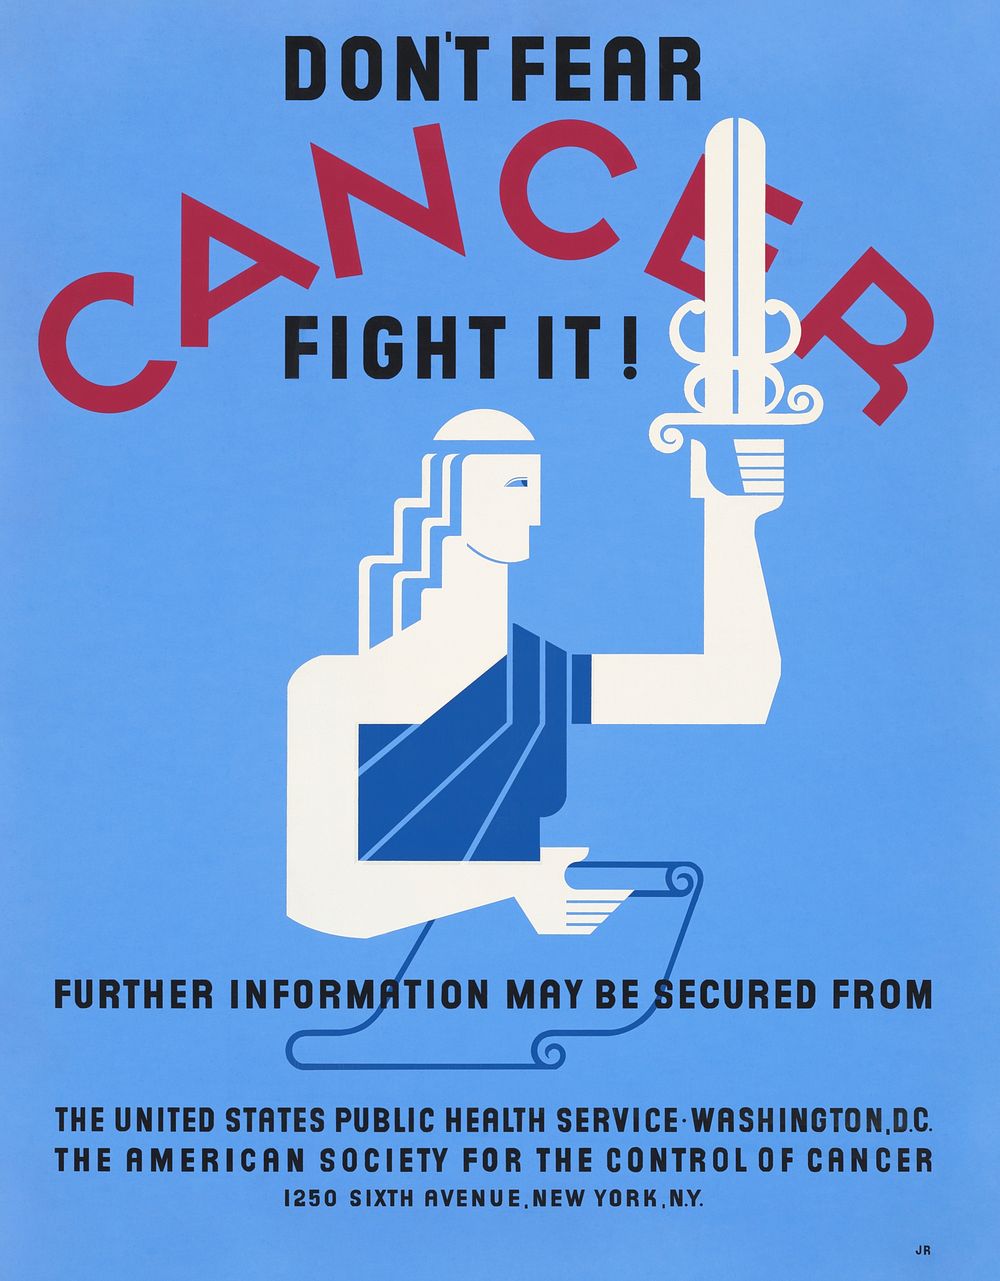 Don't fear cancer fight it! (1918) chromolithograph art by Jerome Henry Rothstein. Original public domain image from Library…